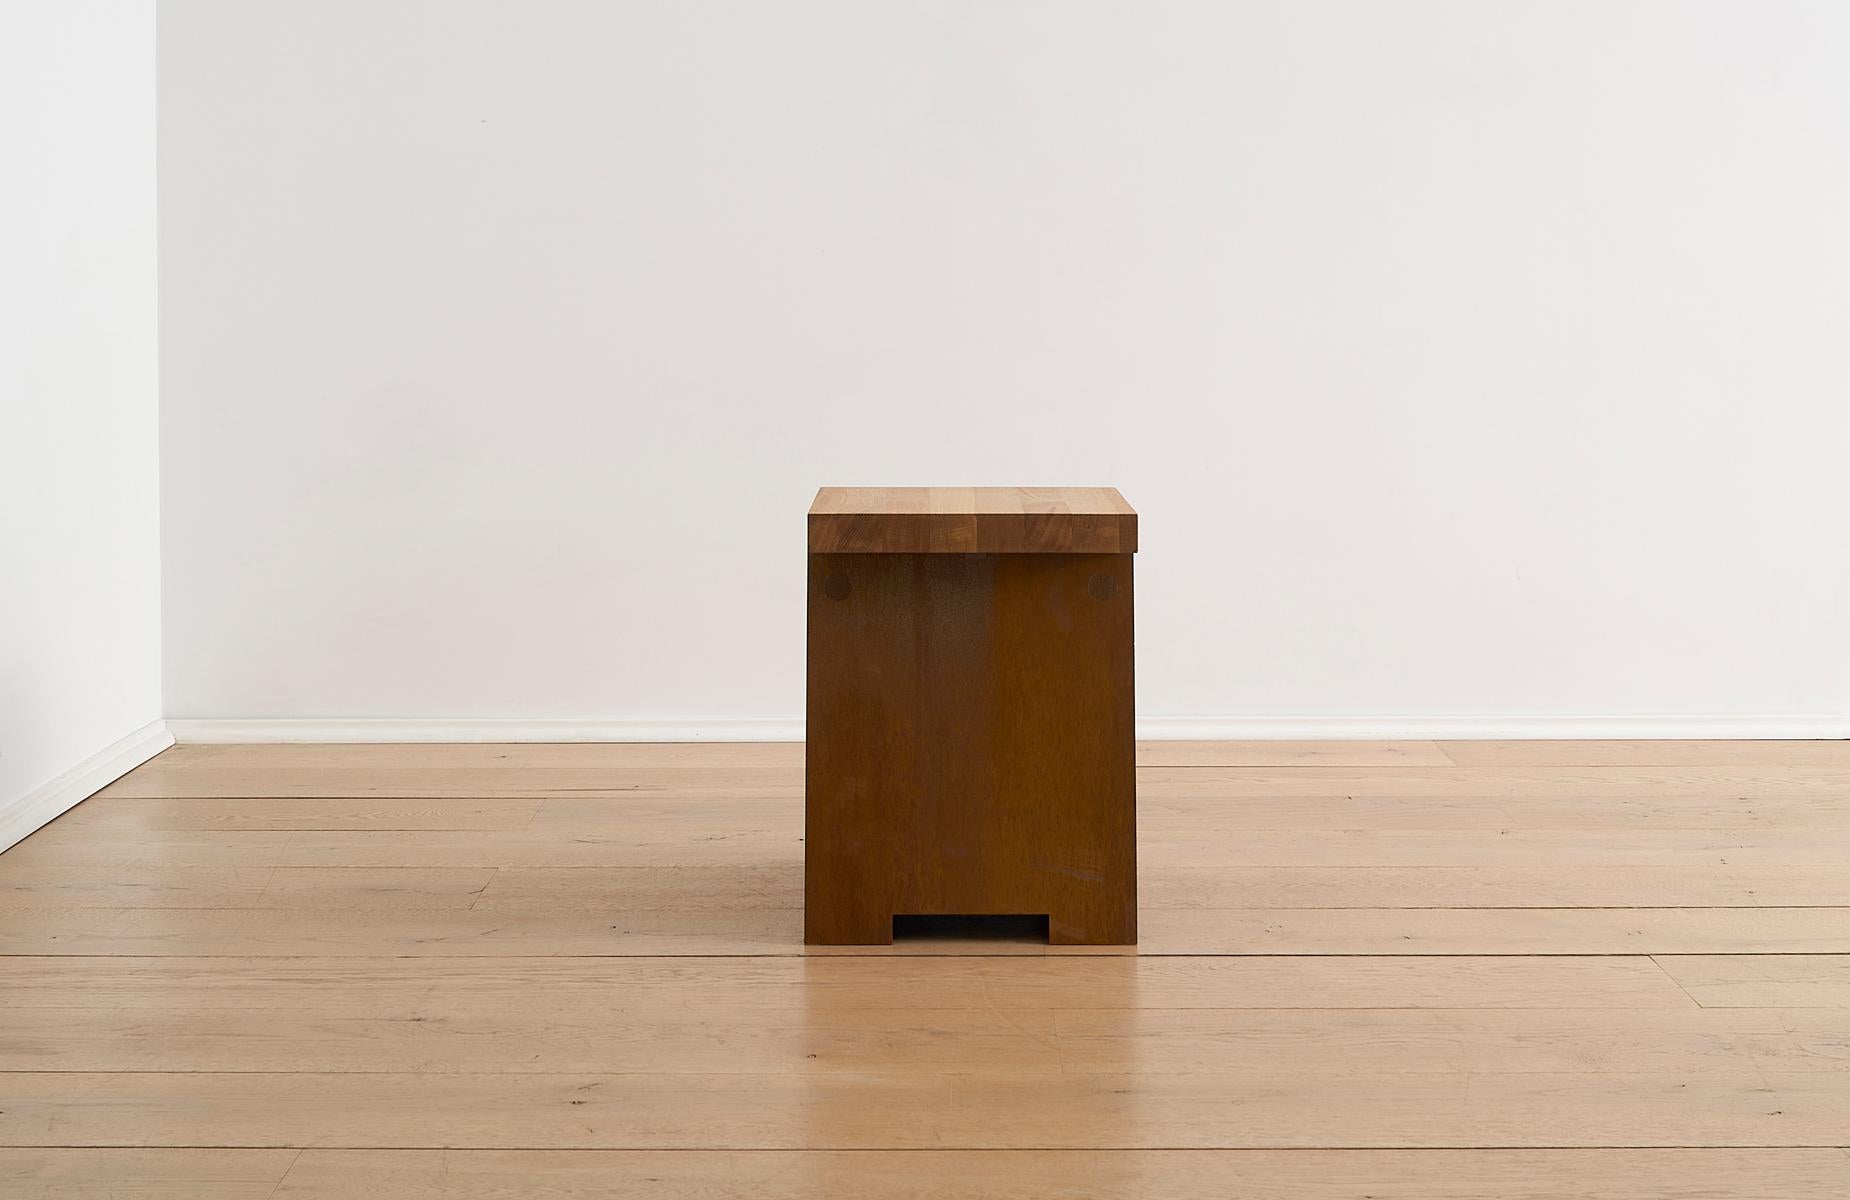 Styled as a side table, a pedestal, or a seat, the possibilities are endless. One thing is for certain: The plinth will elevate your space as much as it does any object you place on it. This work of furniture is ZZ’s first custom design and comes in